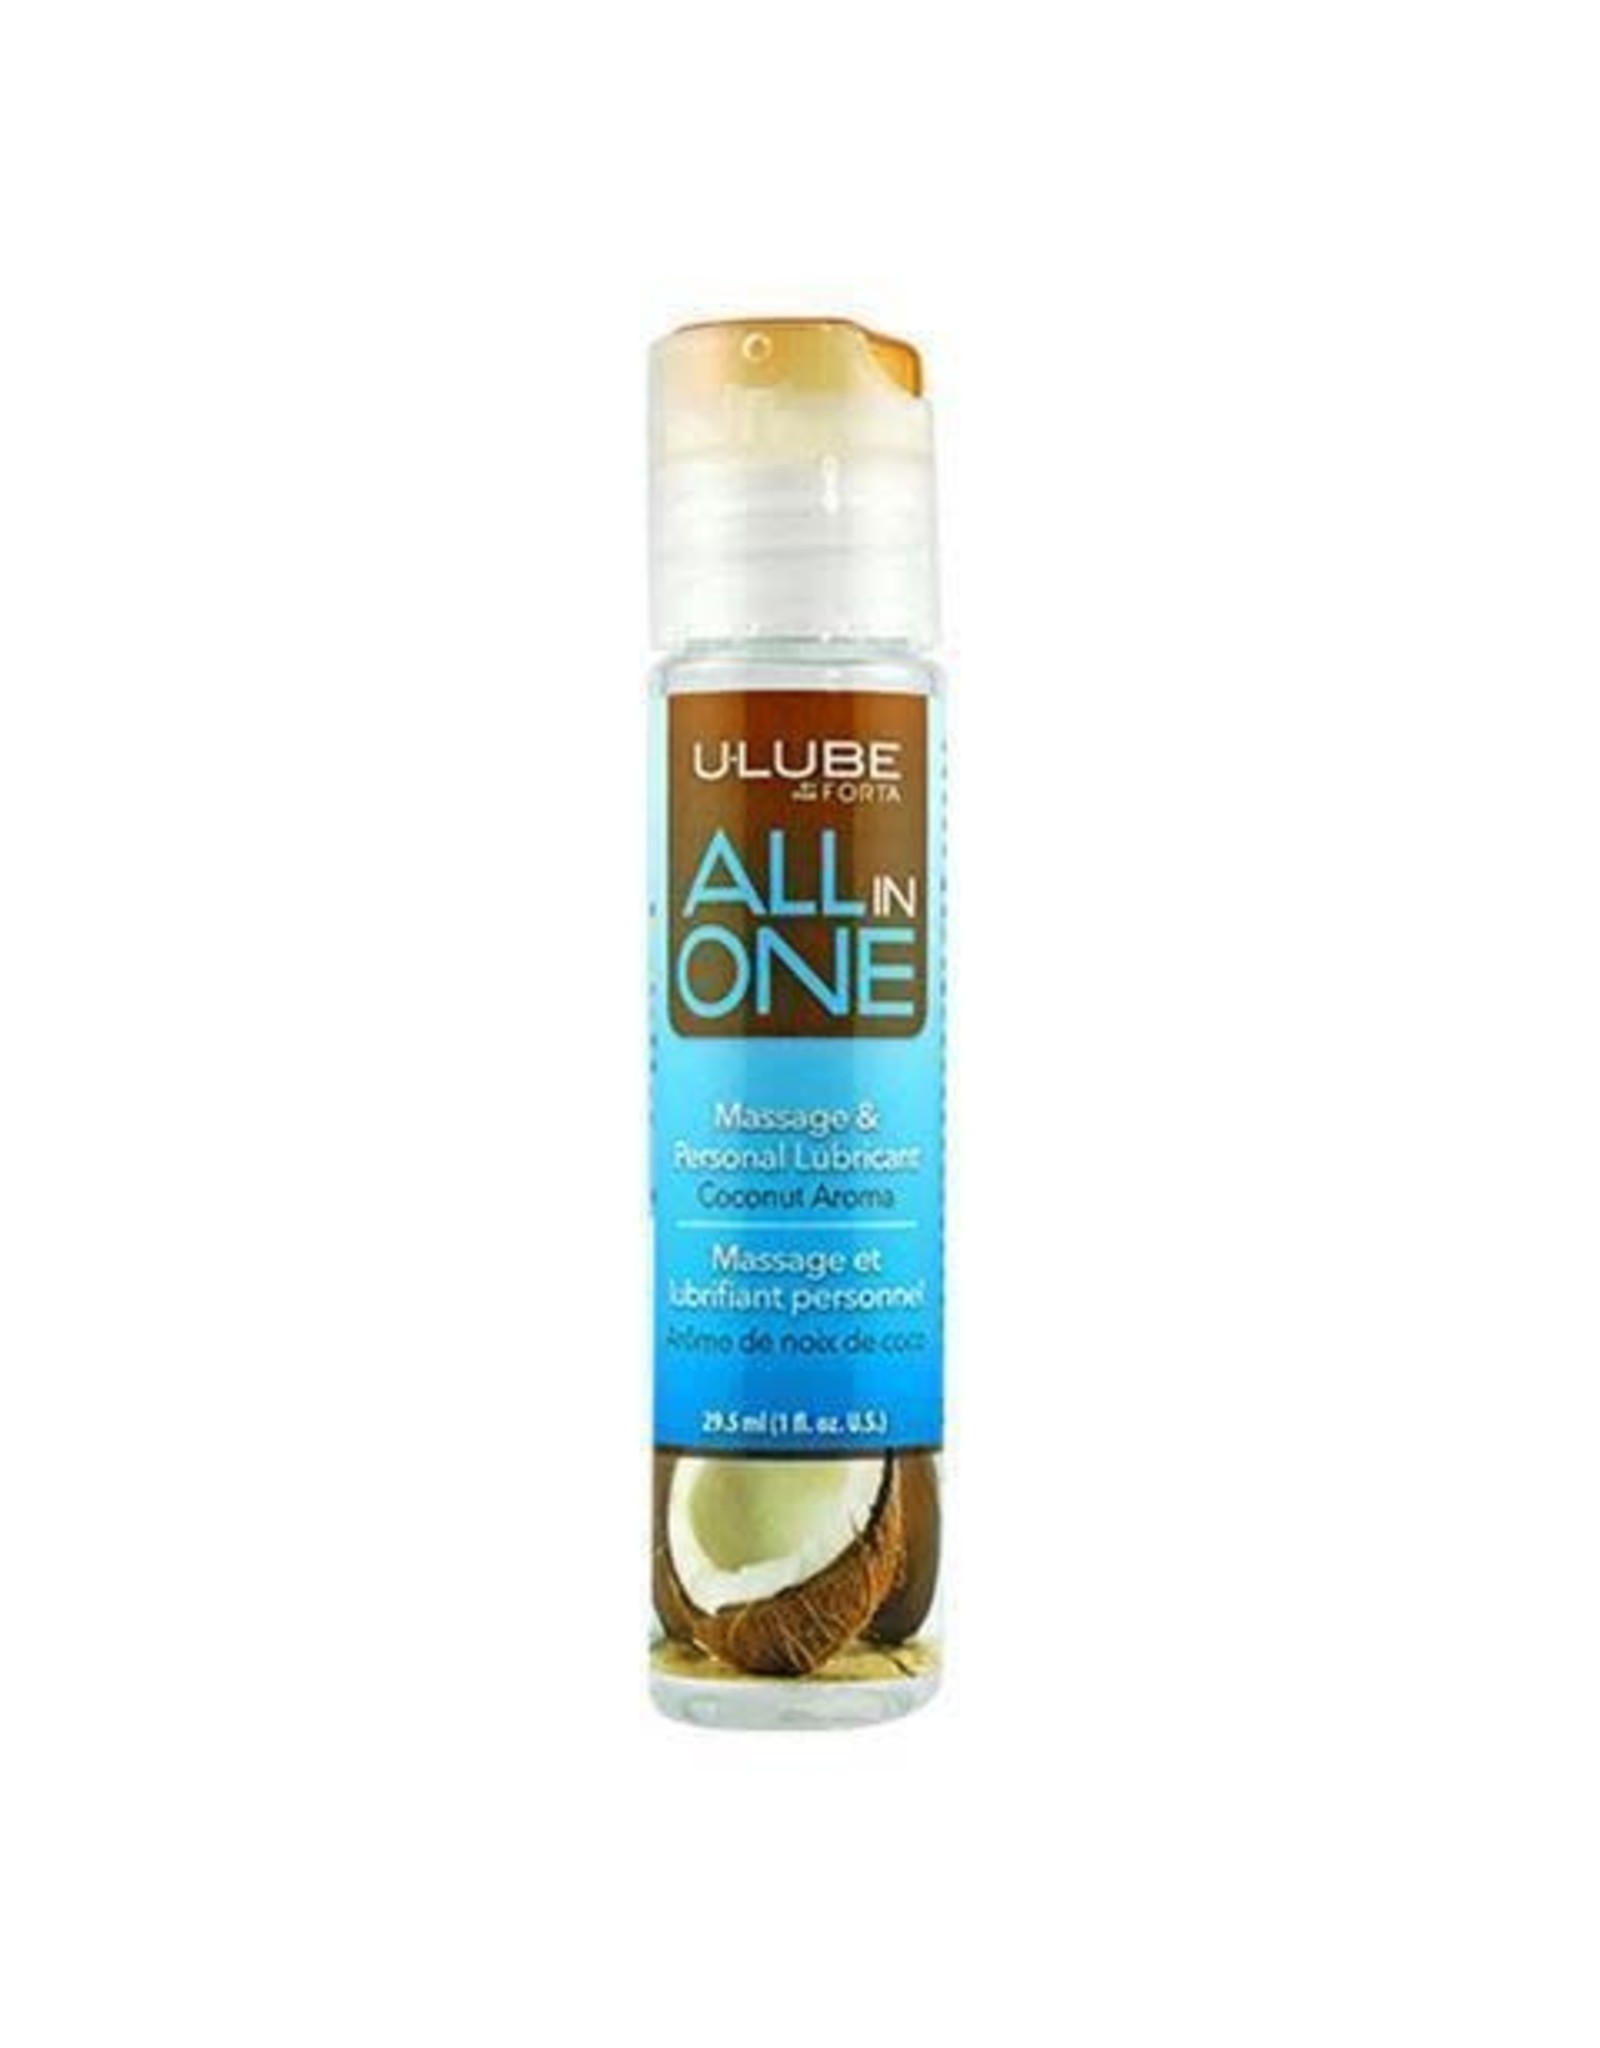 All in One Massage/Lubricant - Coconut (1 oz)